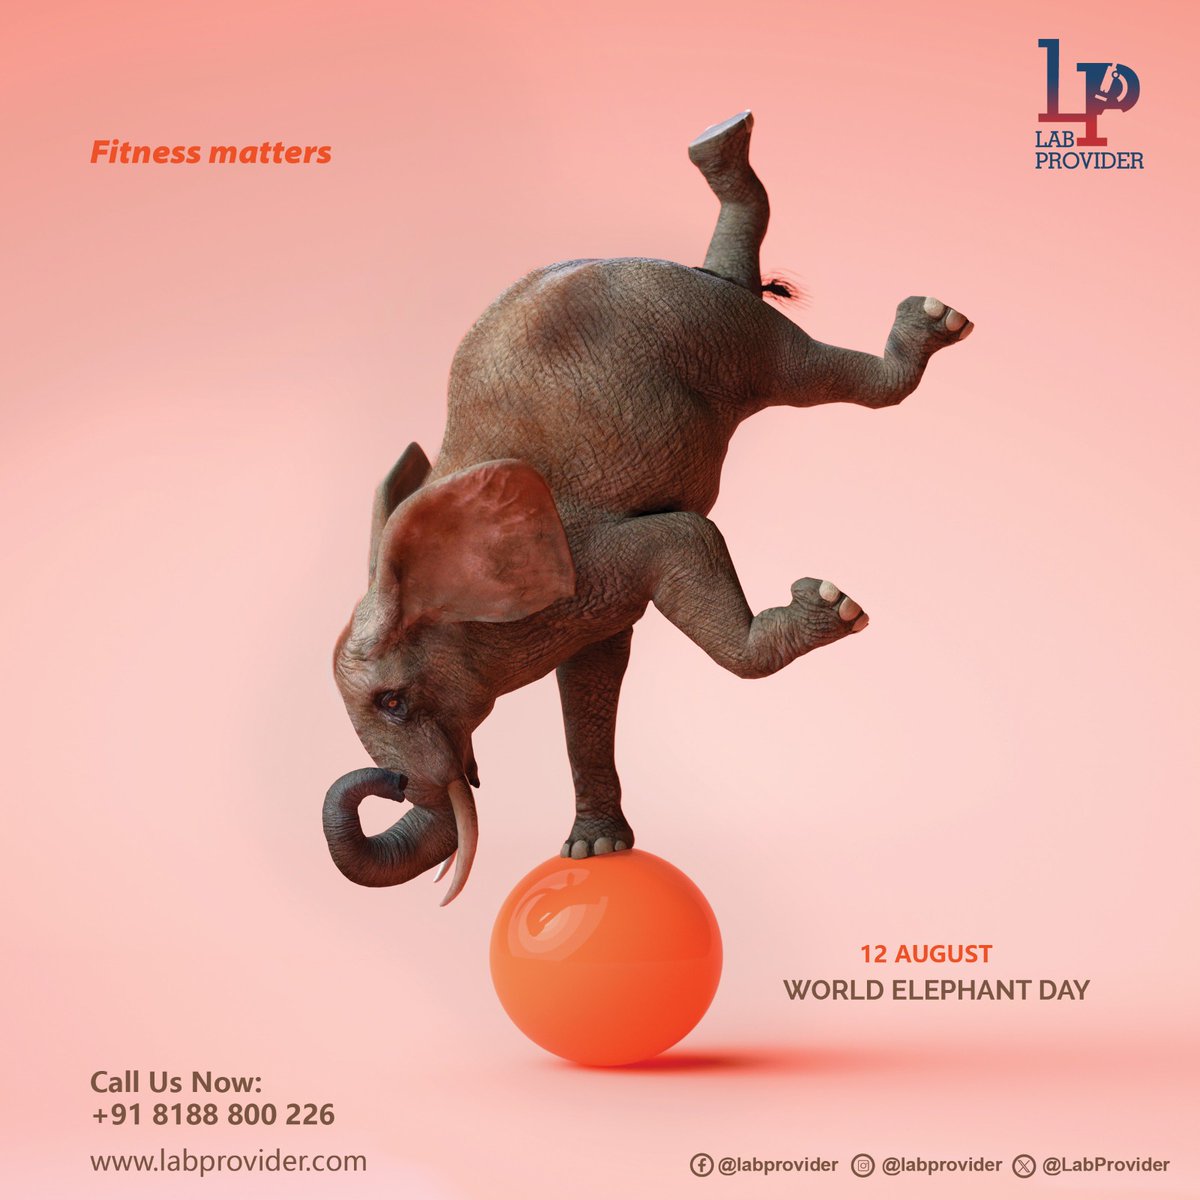 Even animals know the bliss of fitness!
.
.
.
.
.
Reach us at info@labprovider.com or call us at 08188800226
#elephants  #WorldElephantDay2023  #AnimalsLover  #fitnessmatters #labprovider